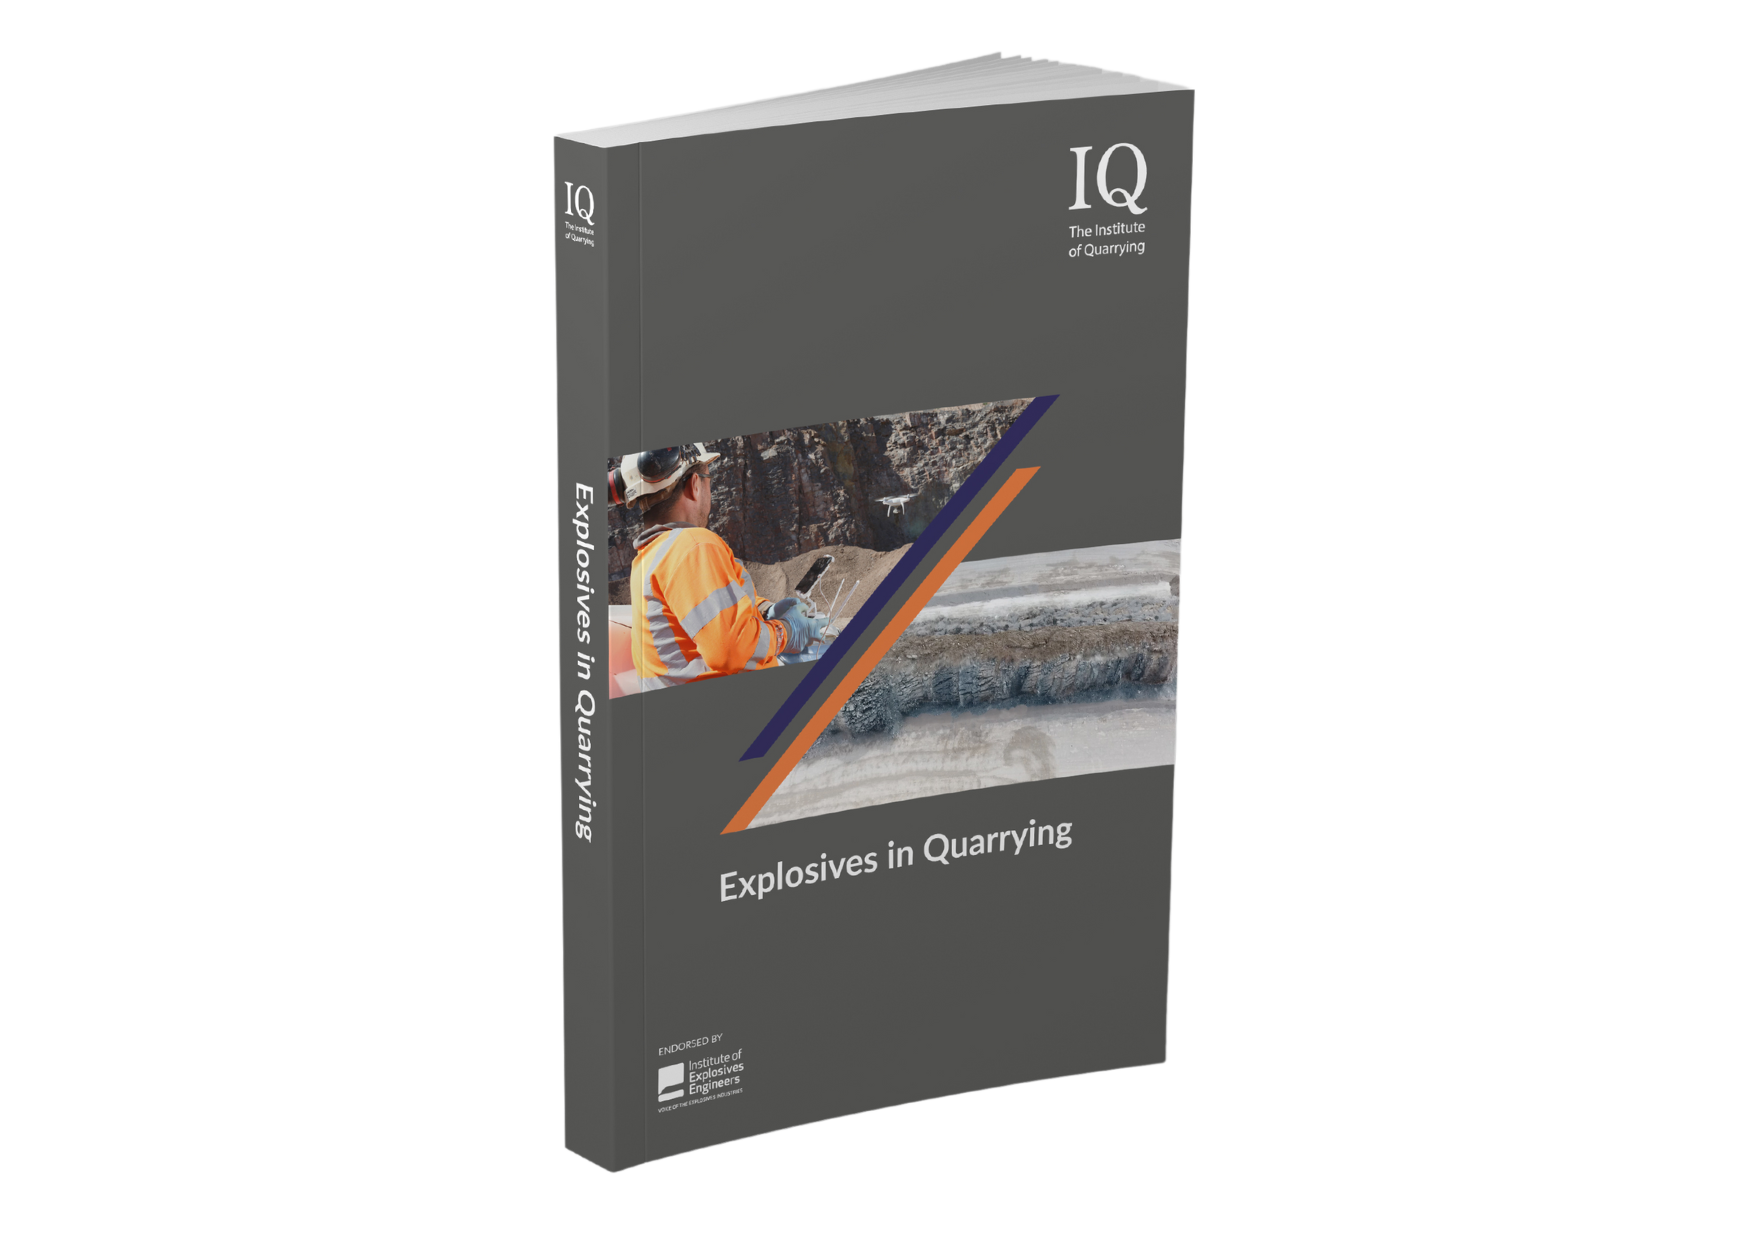 Explosives in Quarrying - Landing page image 1